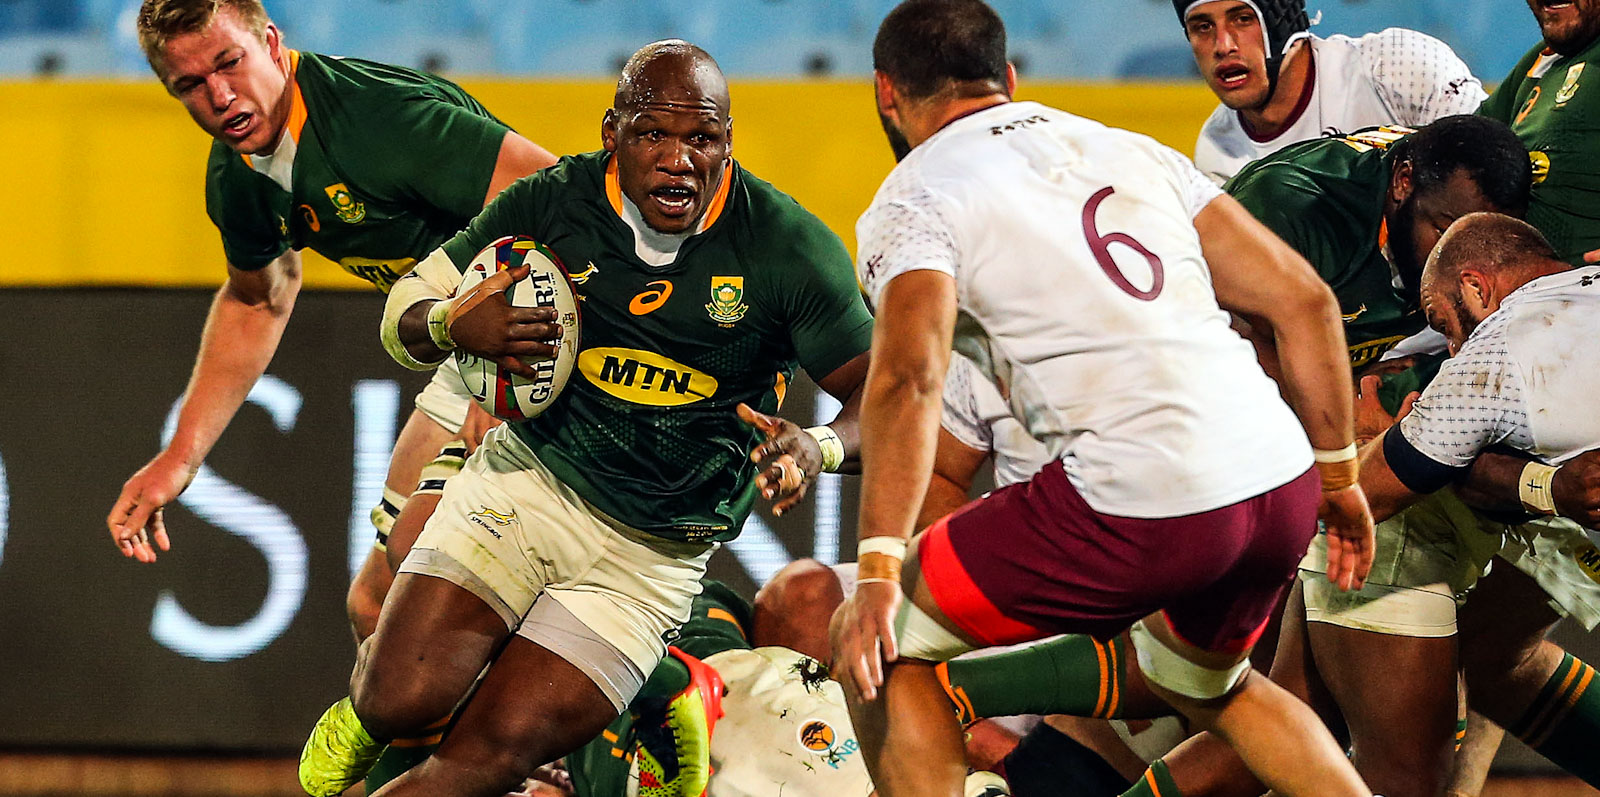 Bongi Mbonambi had a typically busy evening for the Boks and scored one of their six tries.